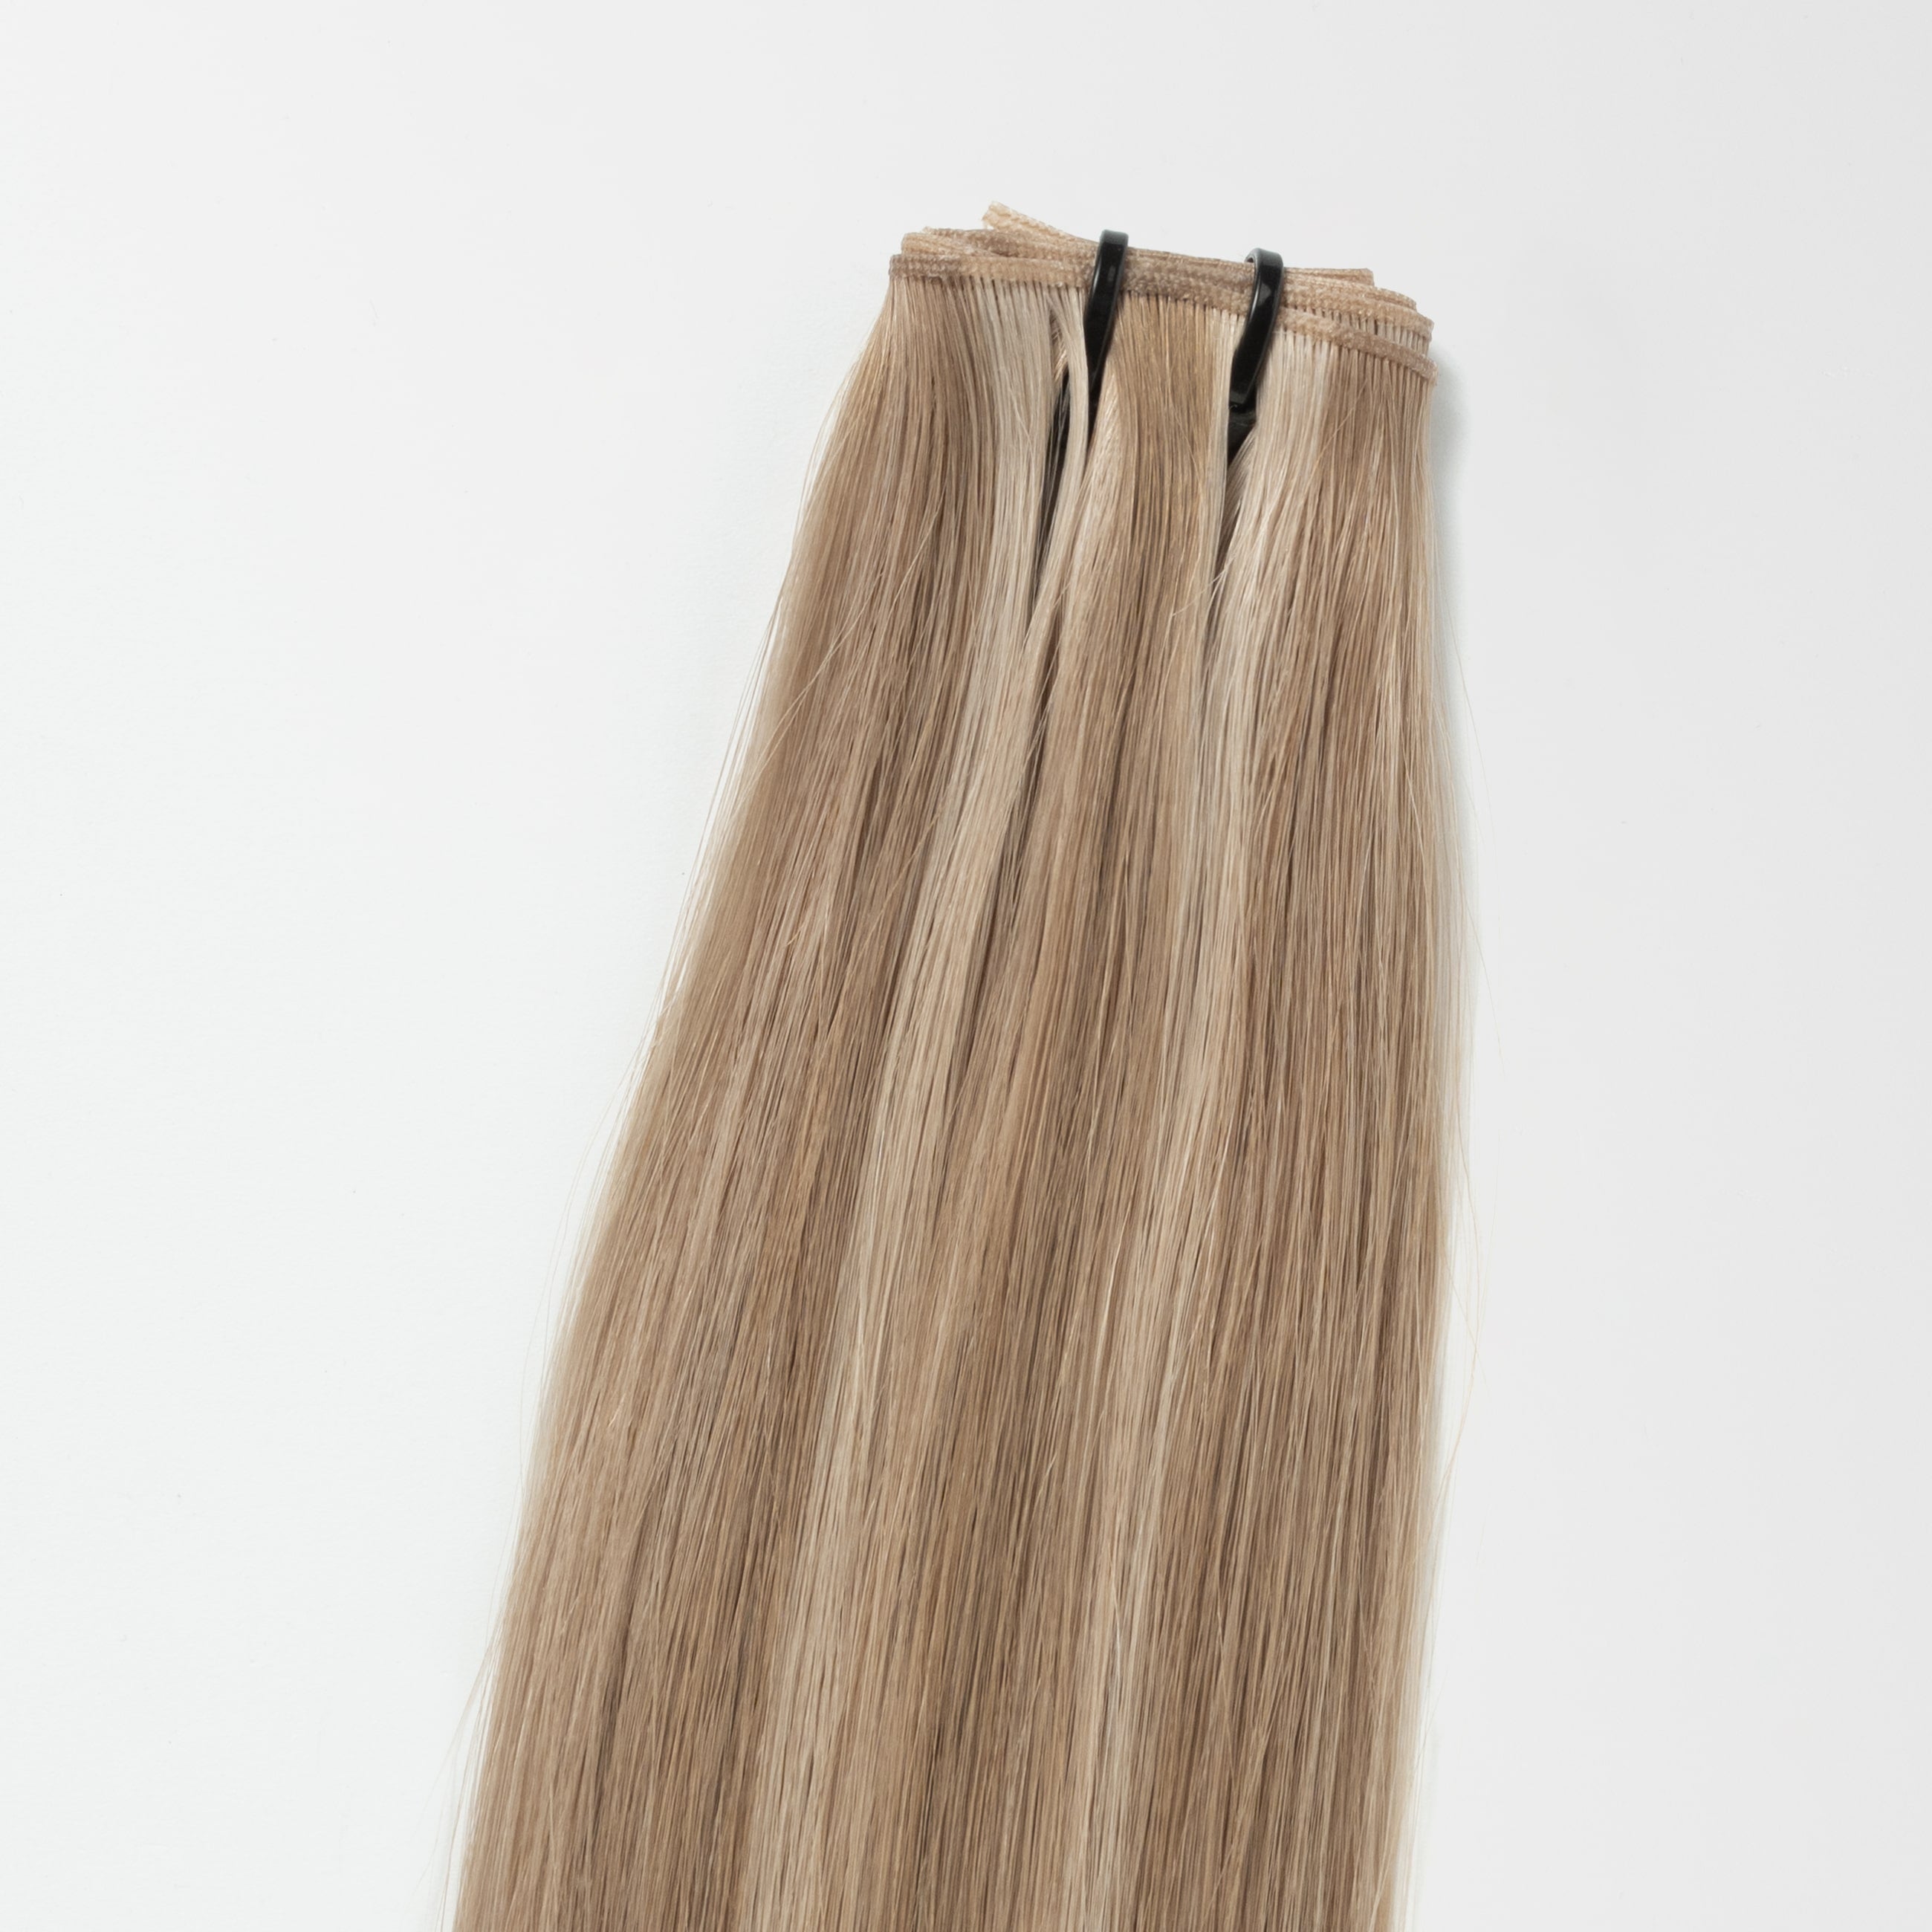 Invisible weft - Beige Blonde Mix 5B/16B